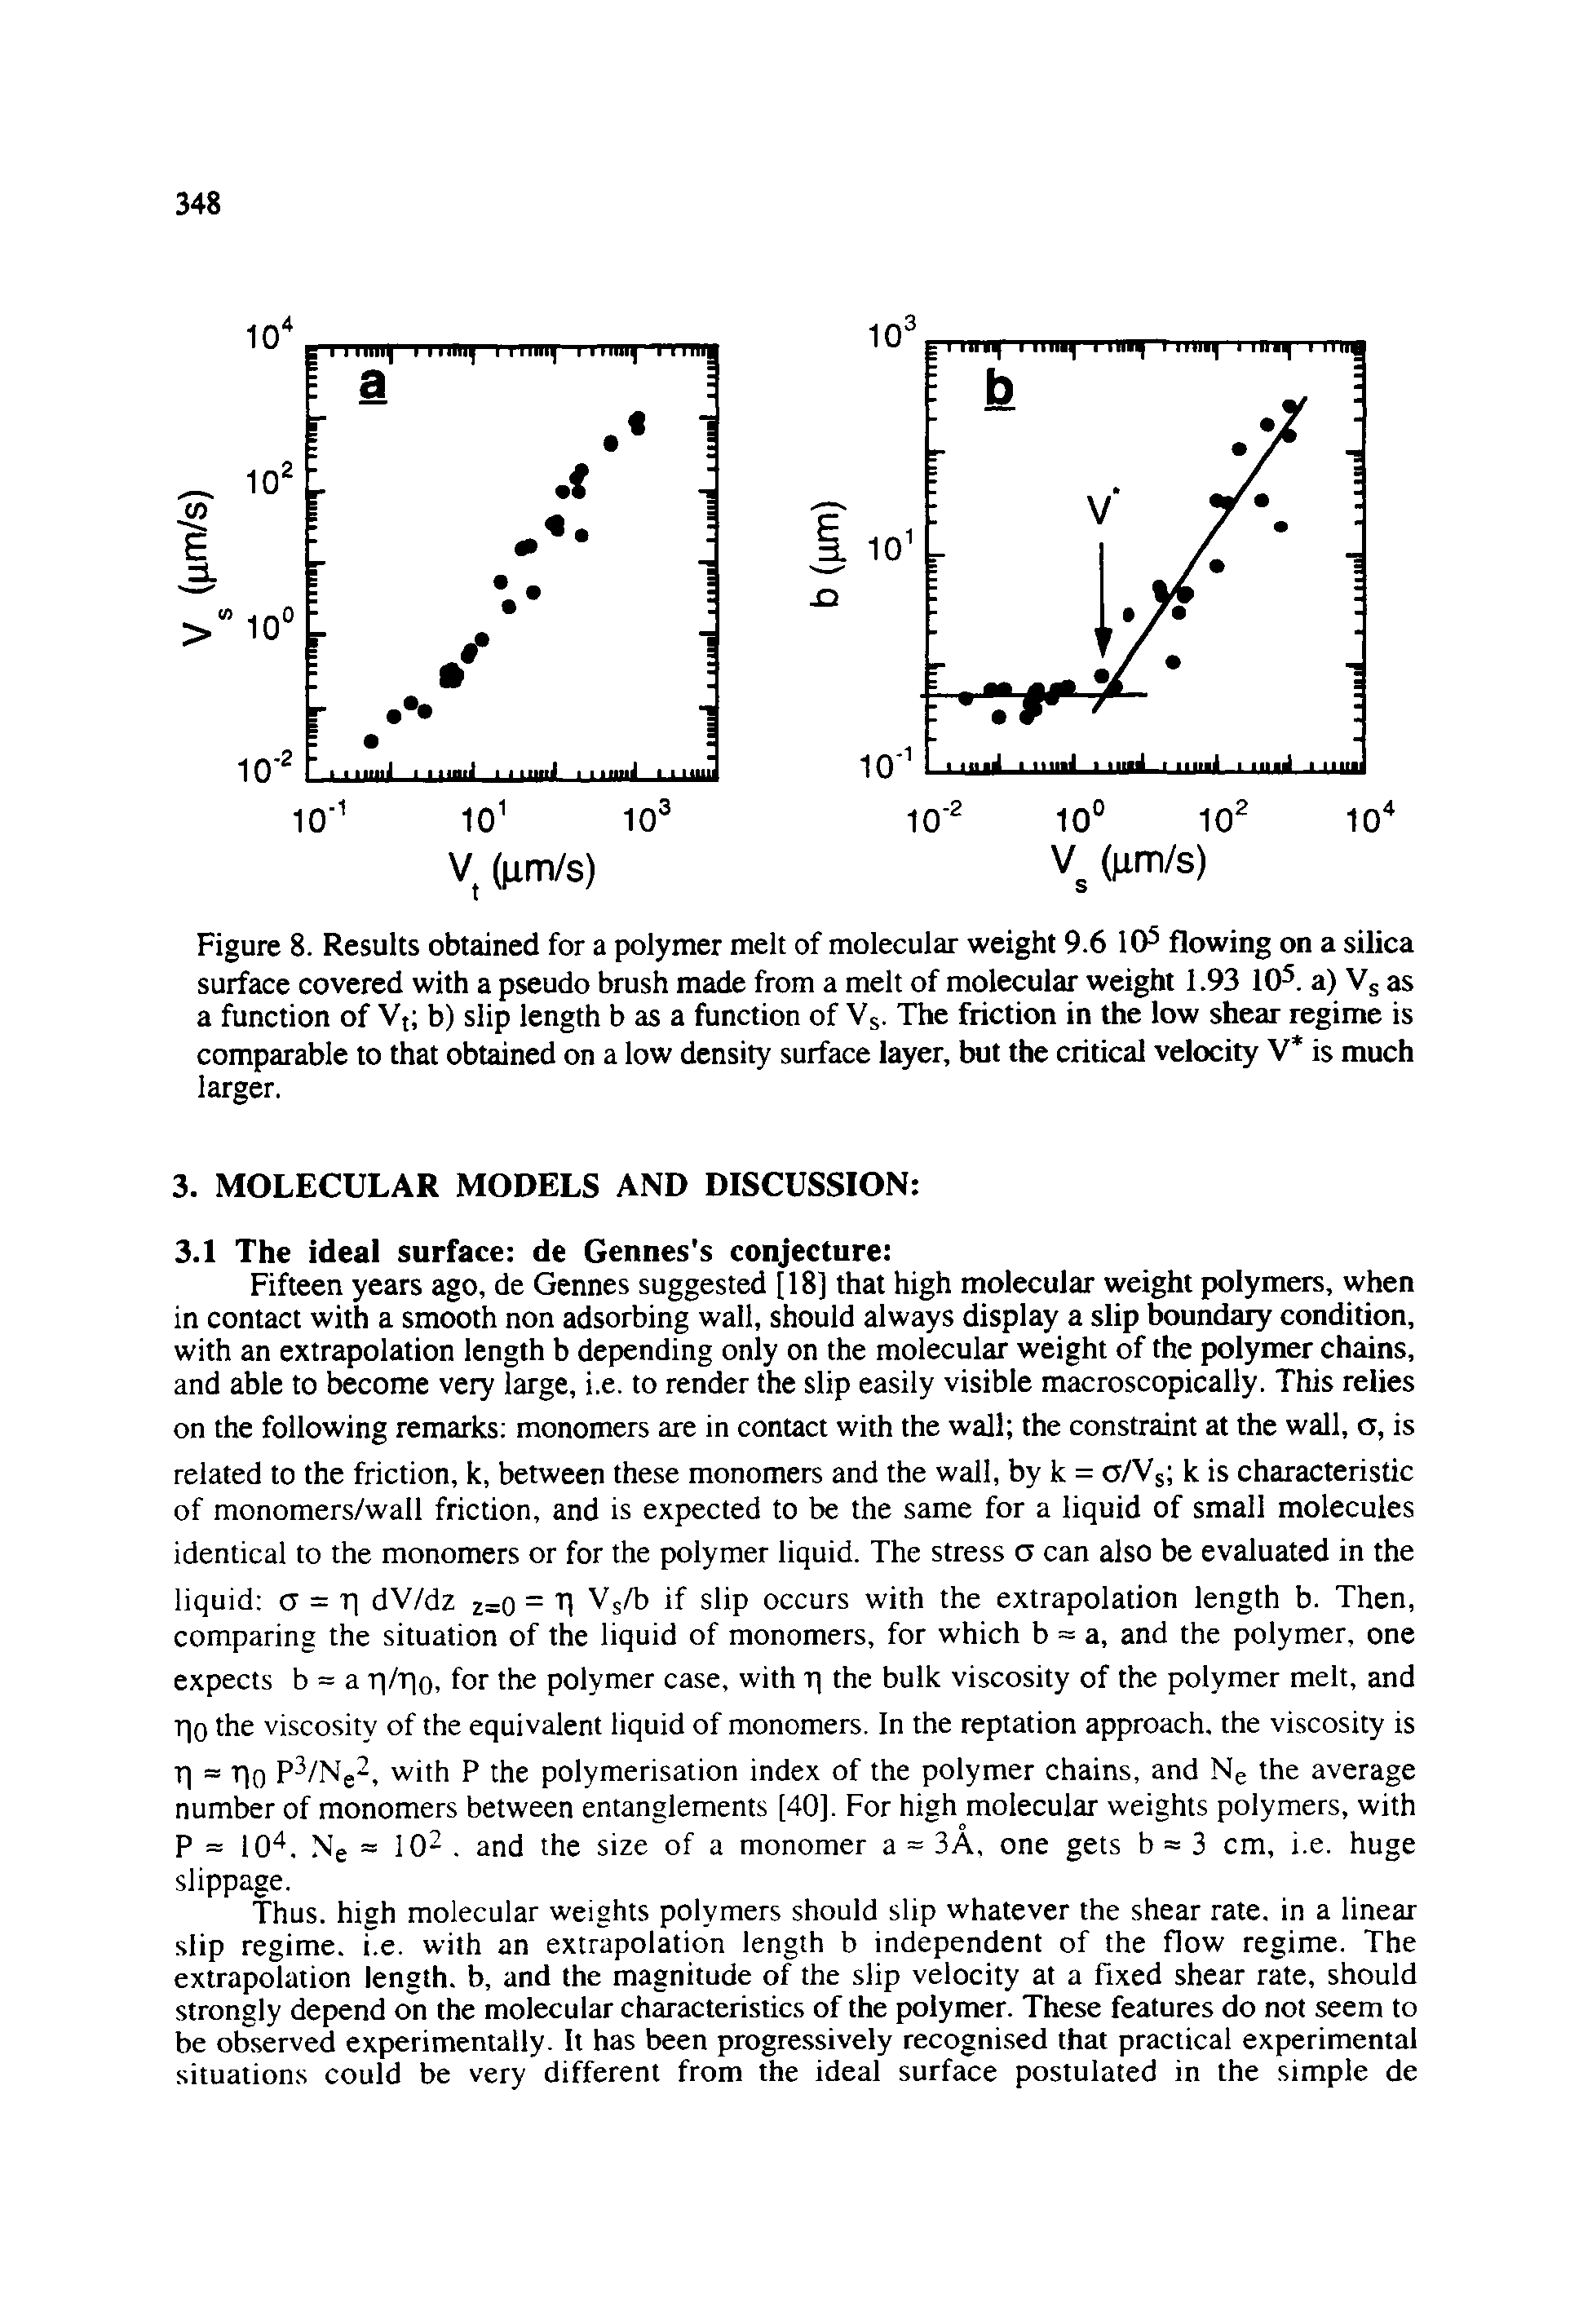 Figure 8. Results obtained for a polymer melt of molecular weight 9.6 10 flowing on a silica surface covered with a pseudo brush made from a melt of molecular weight 1.93 10. a) Vj as a function of Vt b) slip length b as a function of Vj. The friction in the low shear regime is comparable to that obtained on a low density surface layer, but the critical velocity V is much...